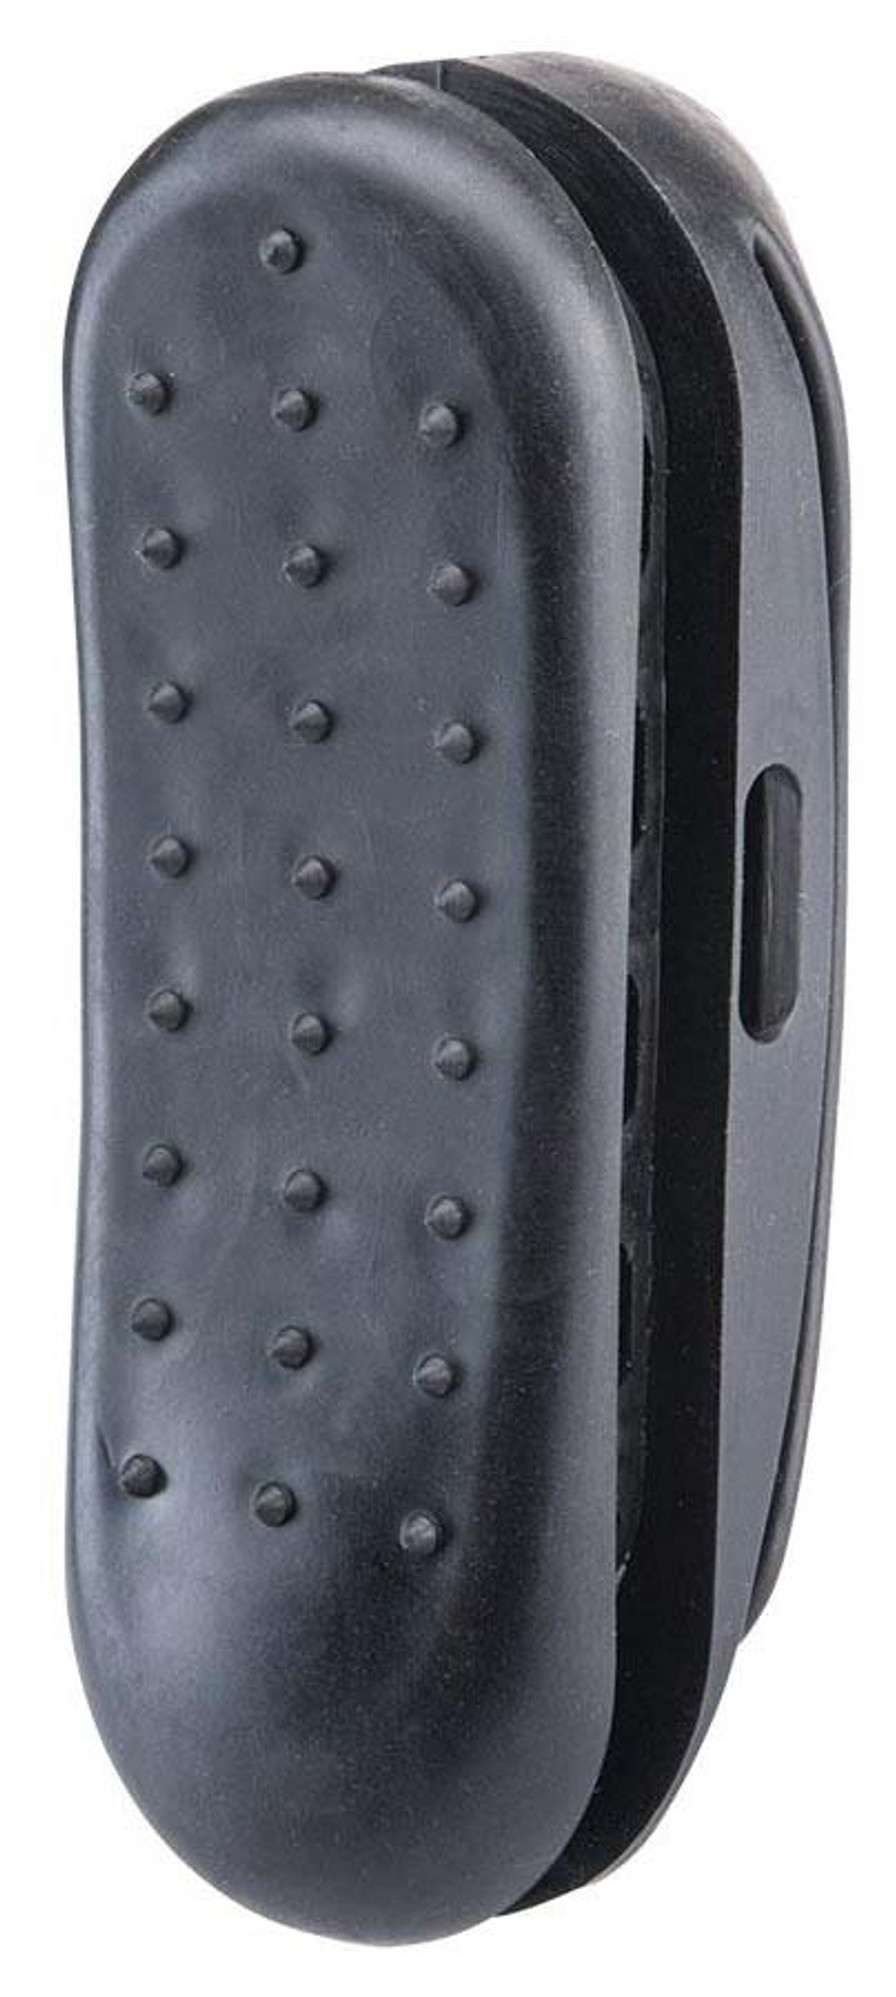 LCT LCK Rubber Stock Pad for AK Series Airsoft AEG Rifles